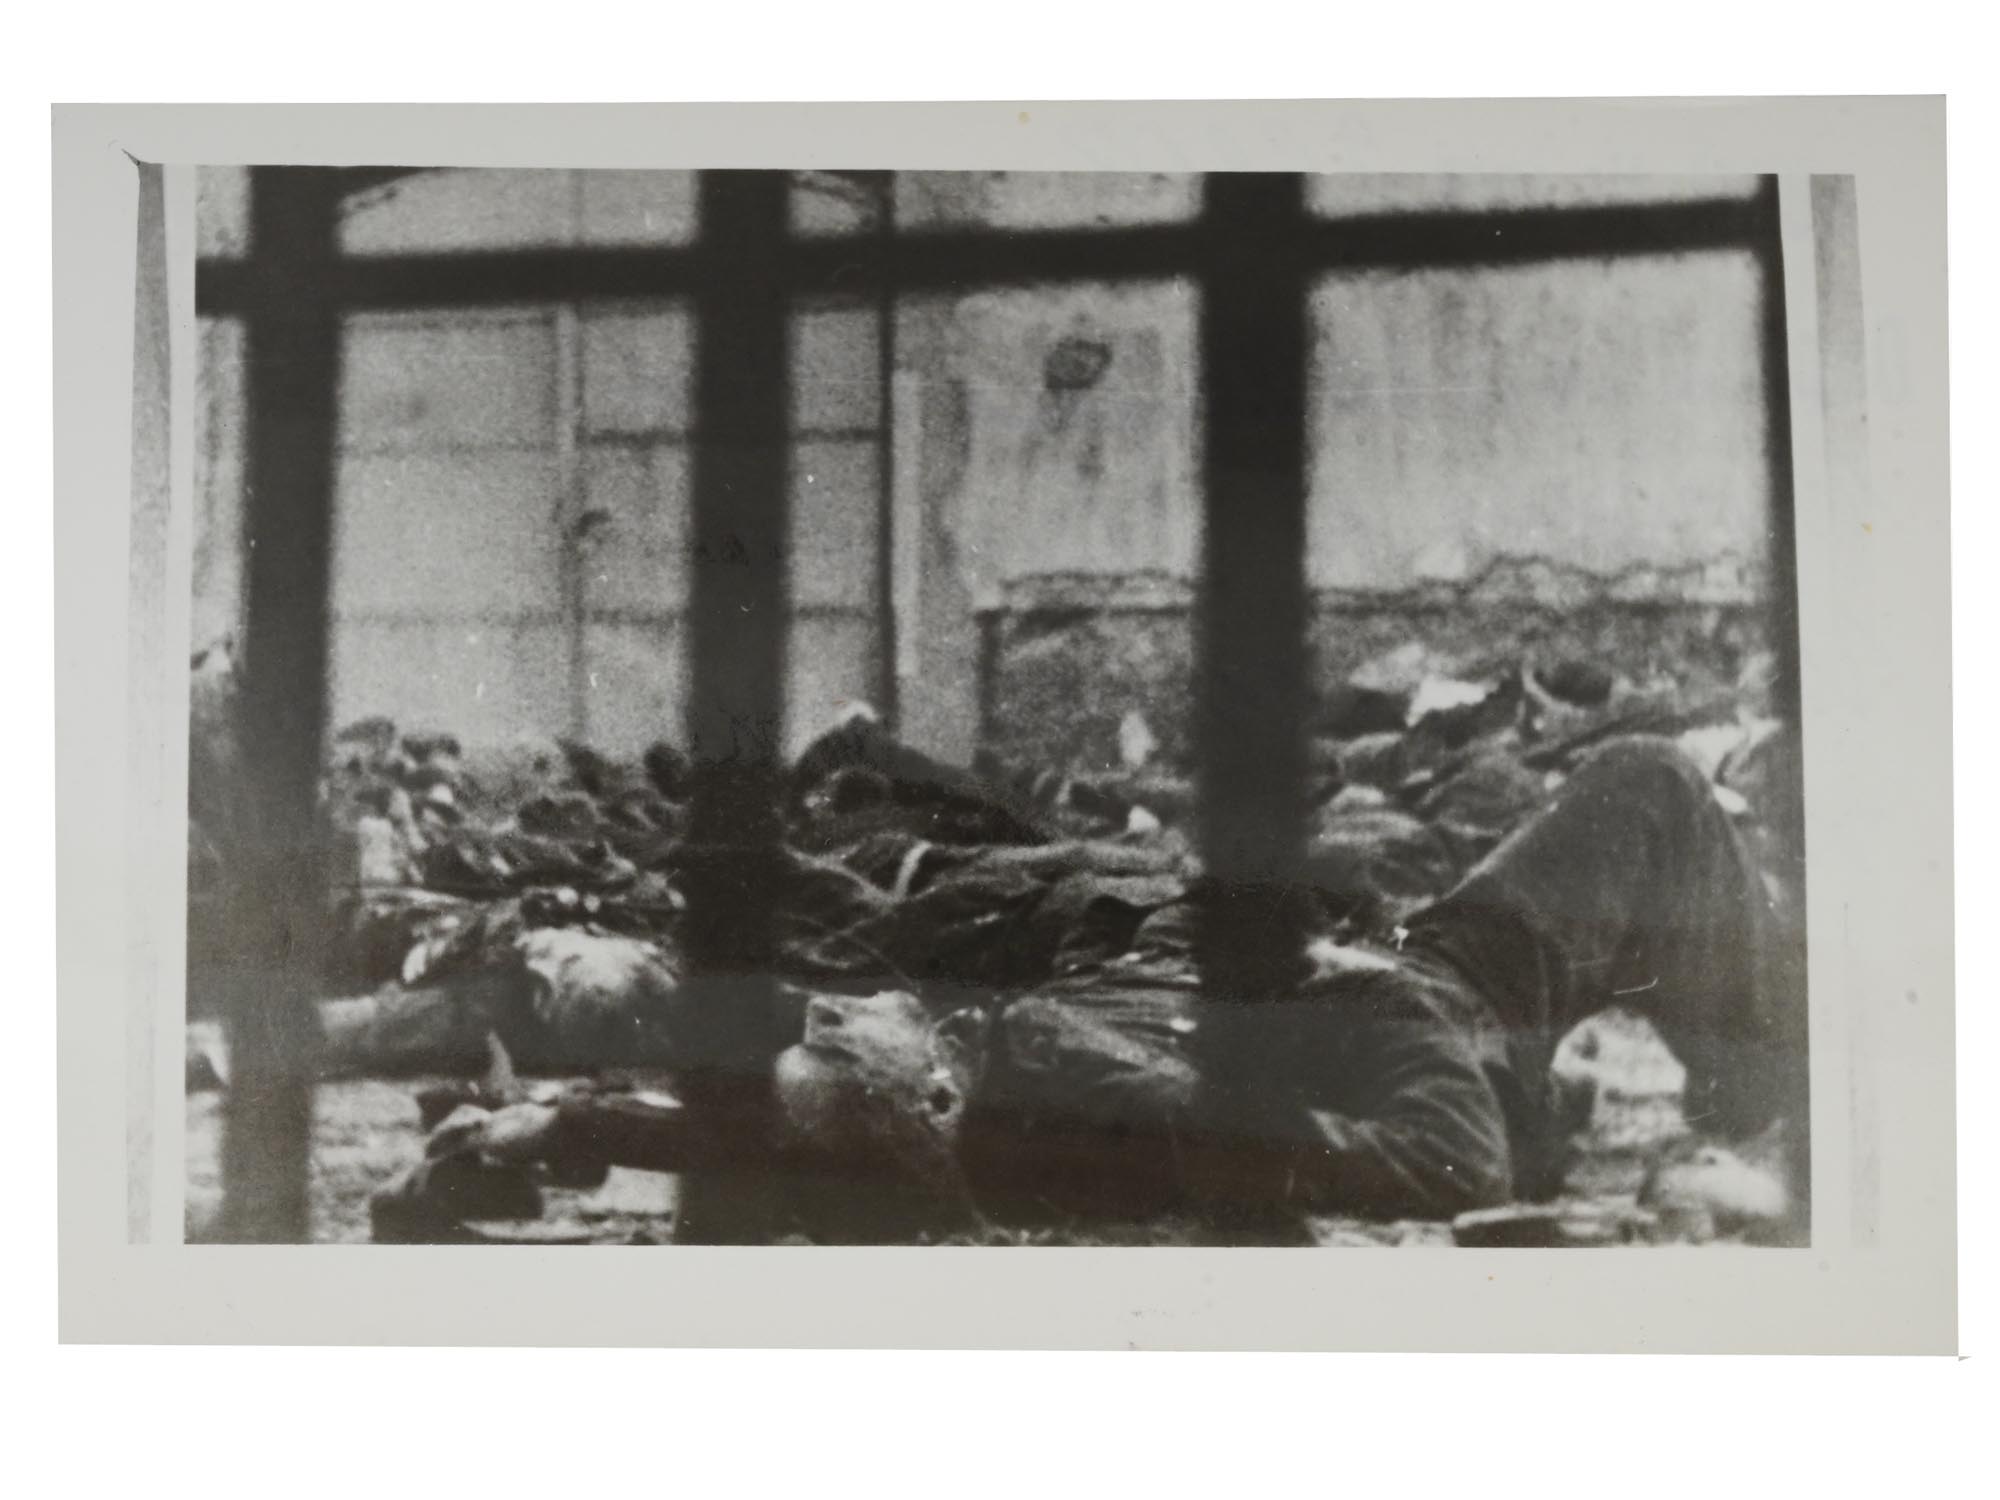 GROUP PHOTOS OF CONCENTRATION CAMPS POLISH ARCHIVES PIC-2